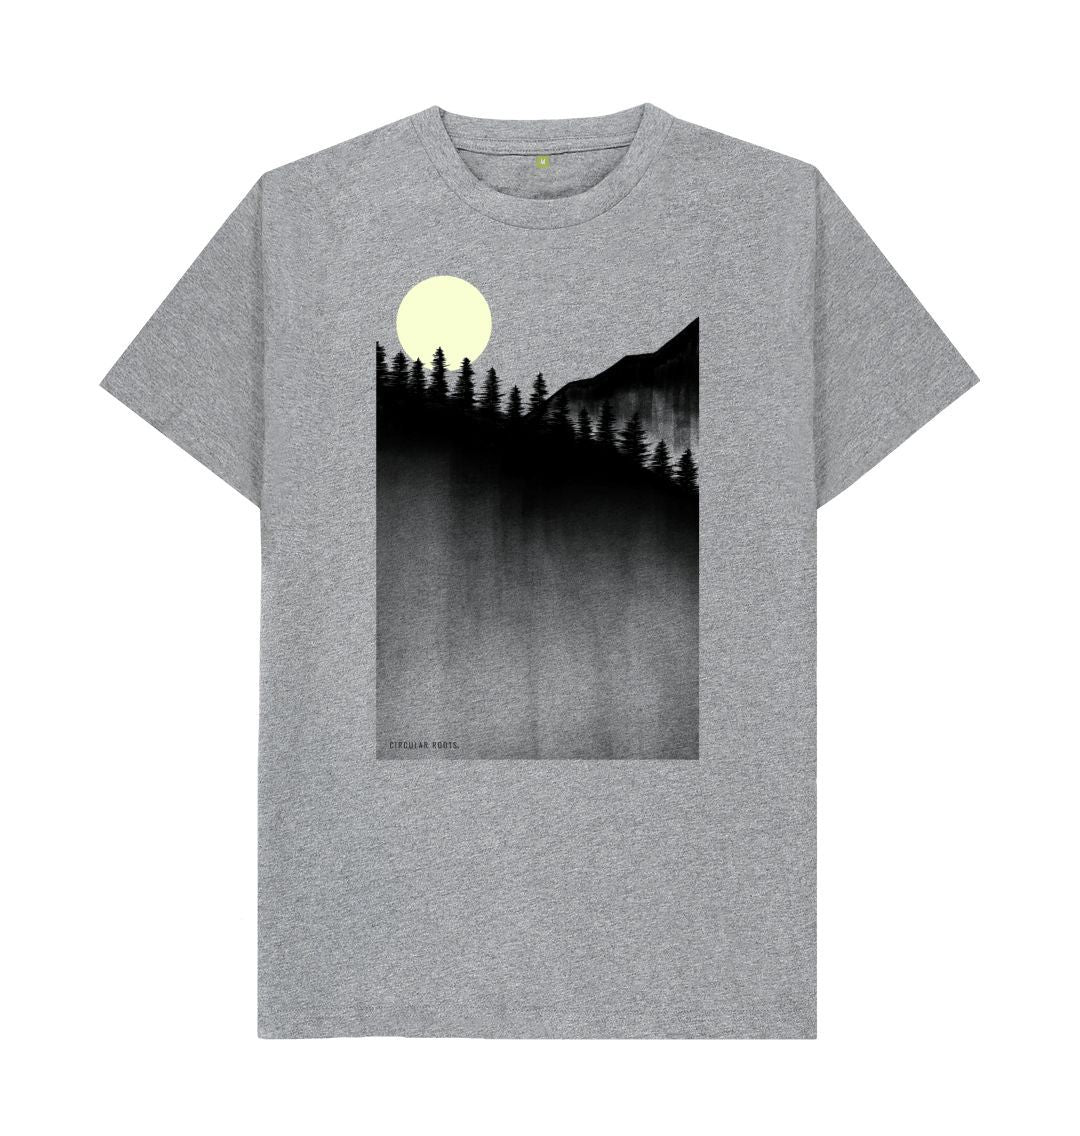 Athletic Grey Moonlit Mountains